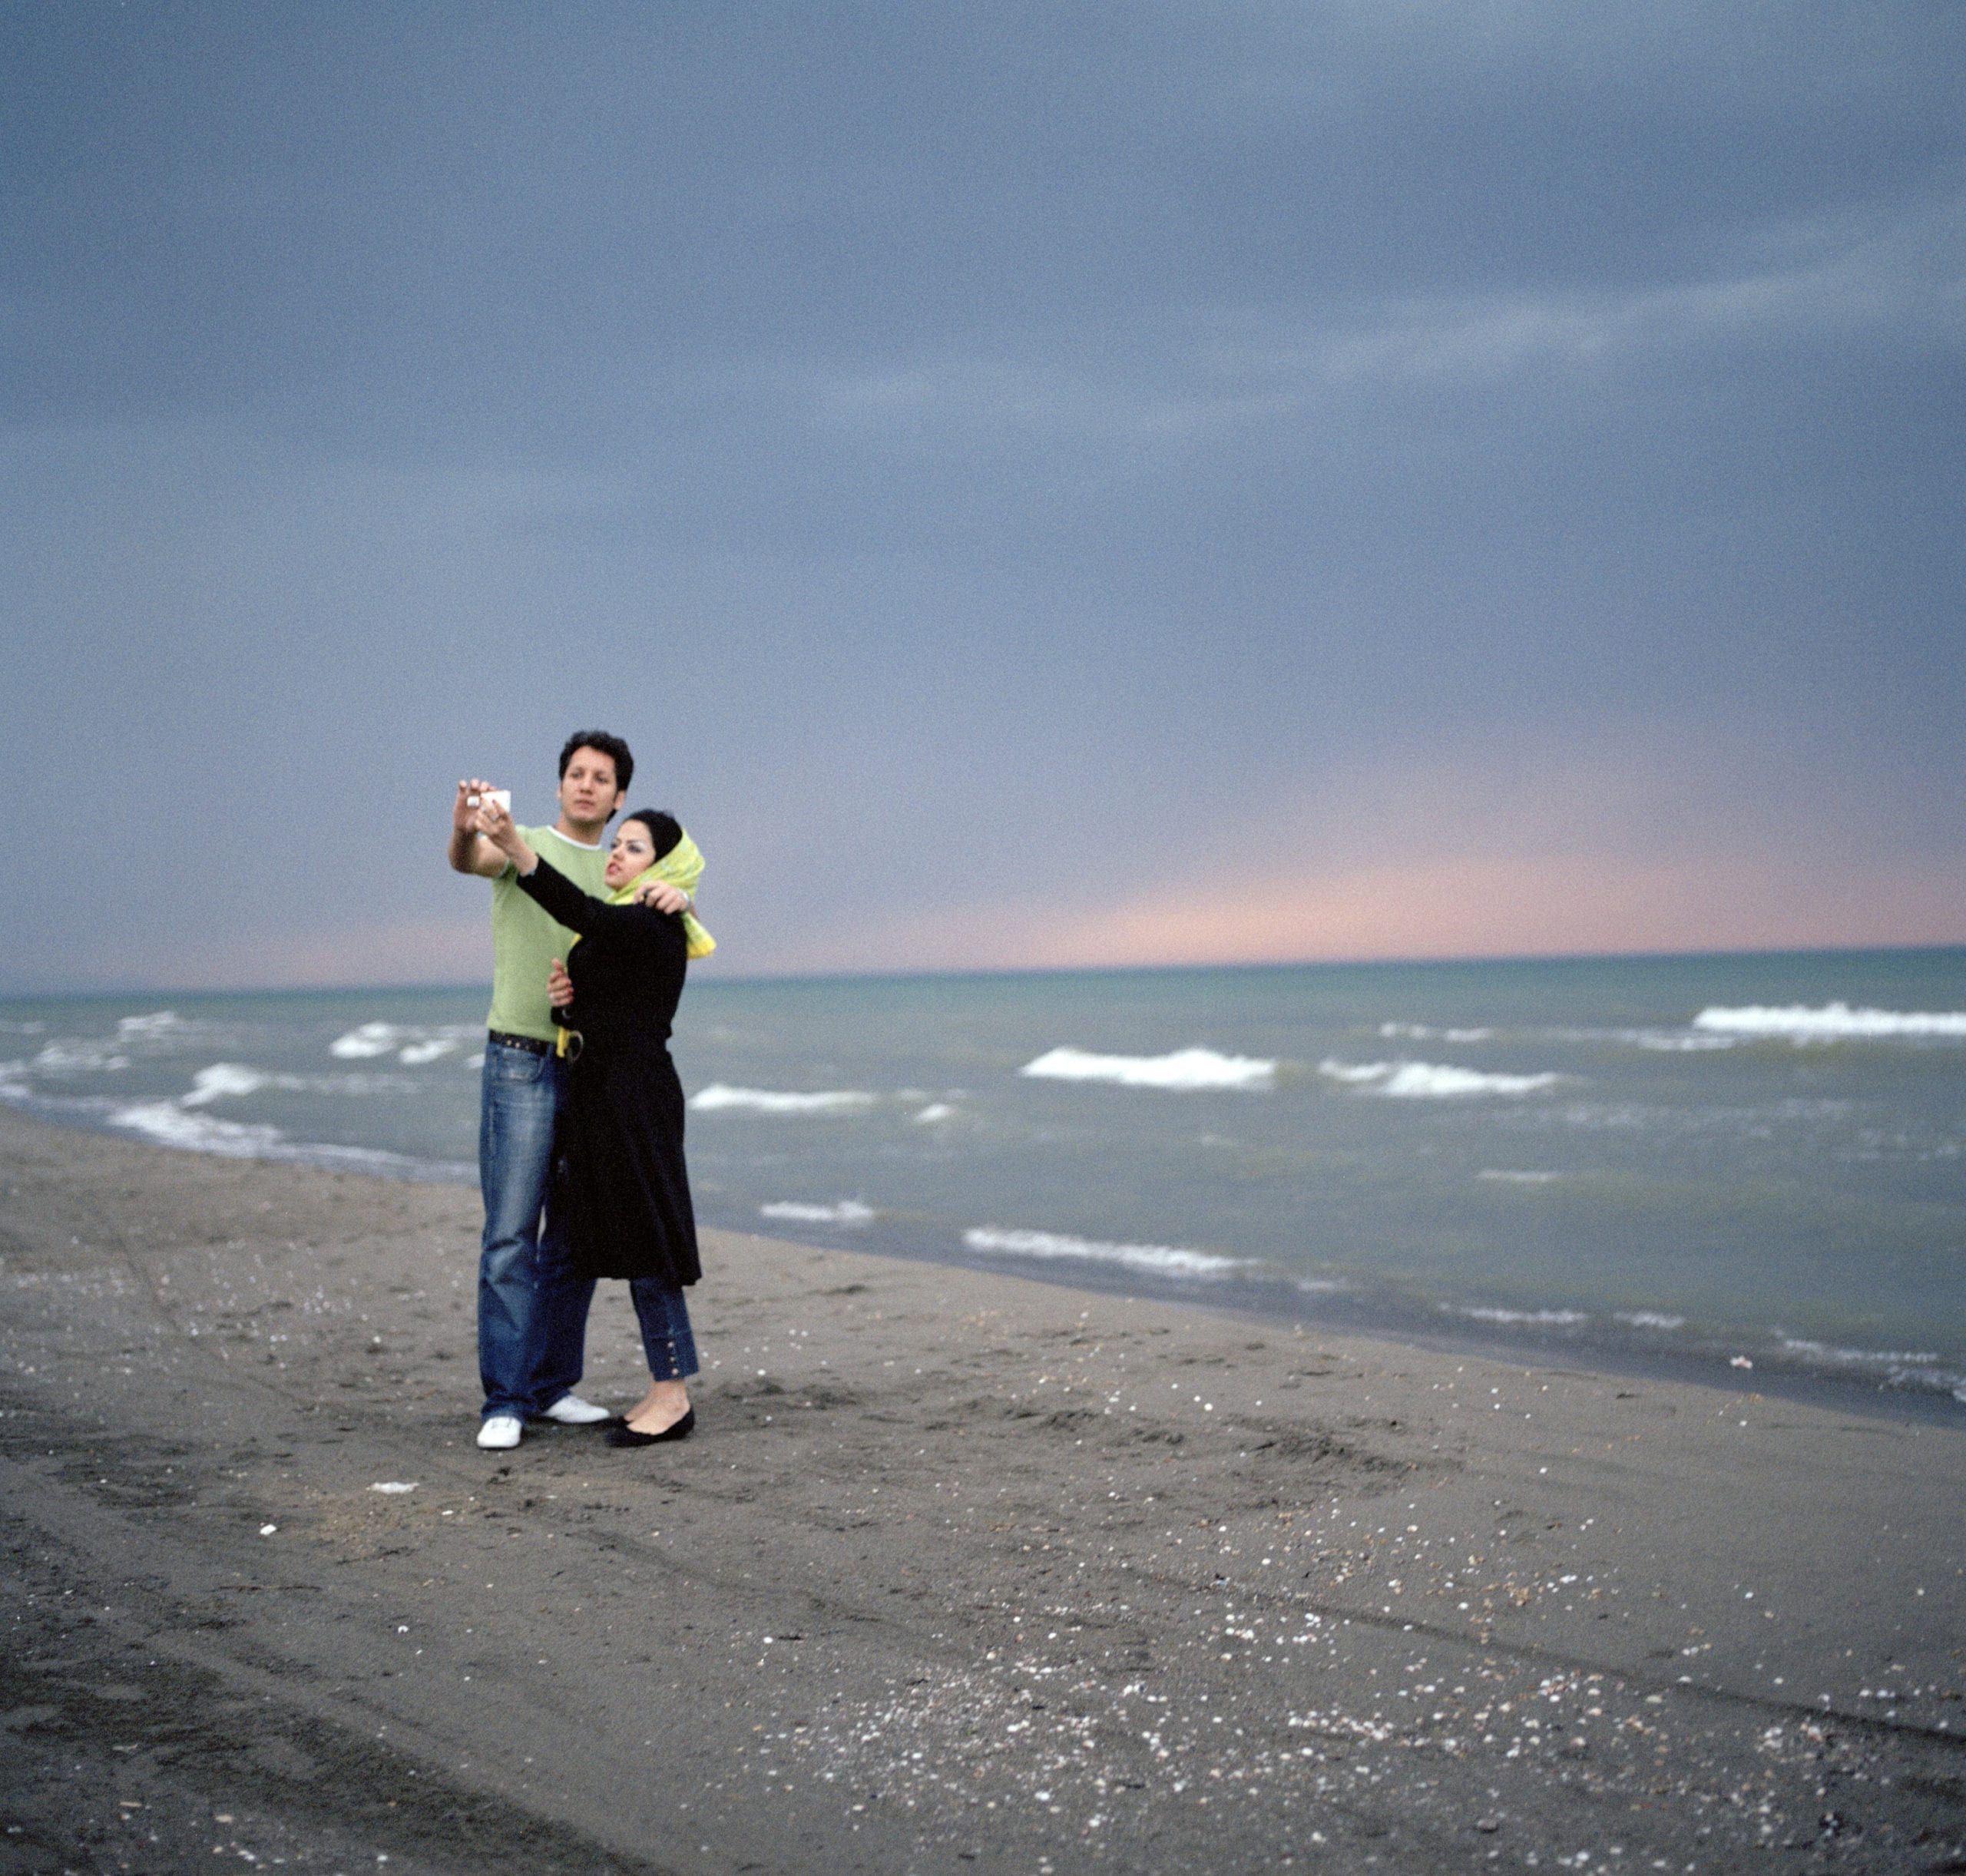 A couple photograph themselves on their mobile phone in front of the Caspian Sea © Olivia Arthur/Magnum Photos